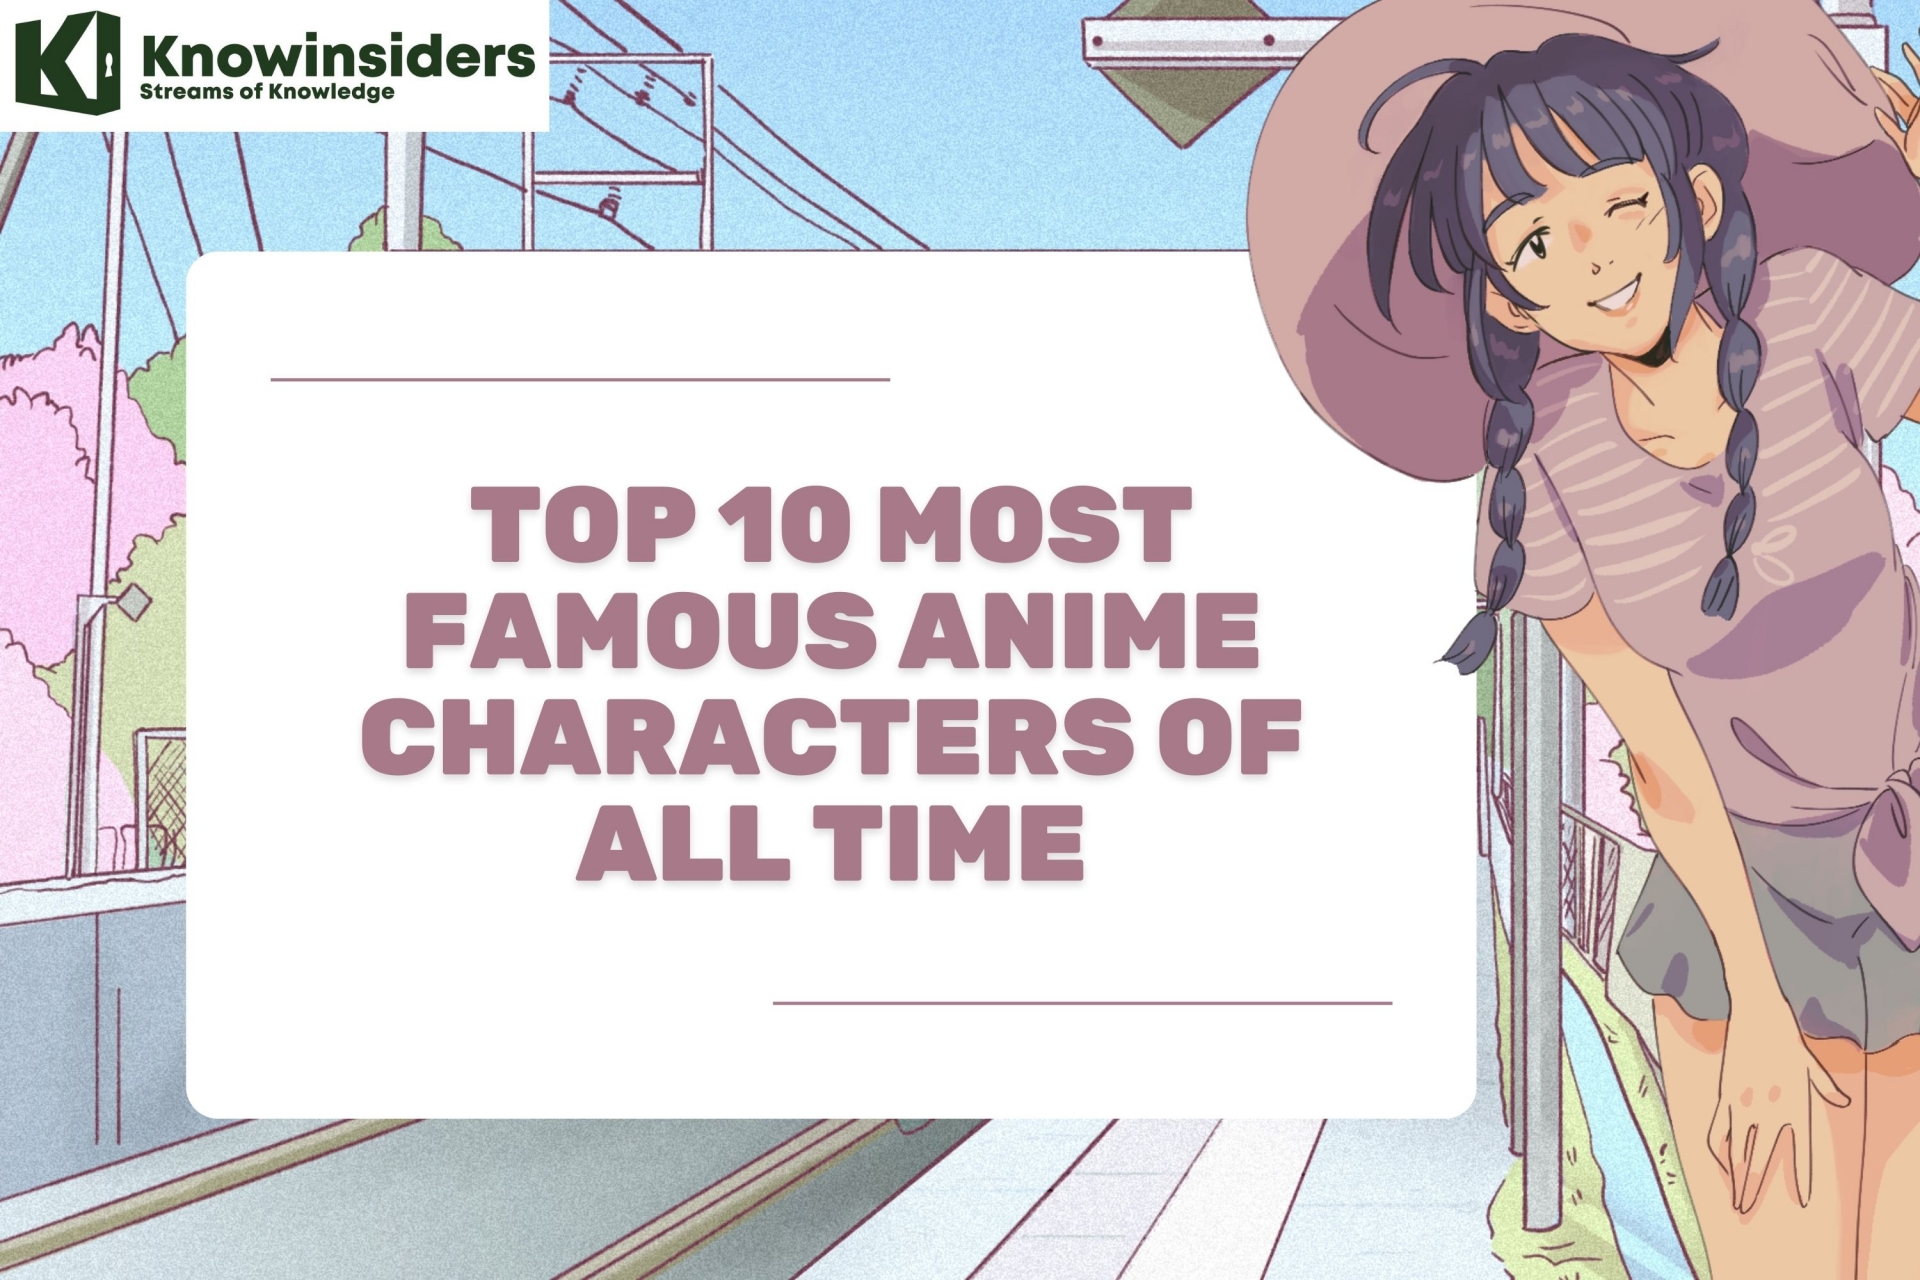 10 Most Famous Anime Characters of All Time | KnowInsiders